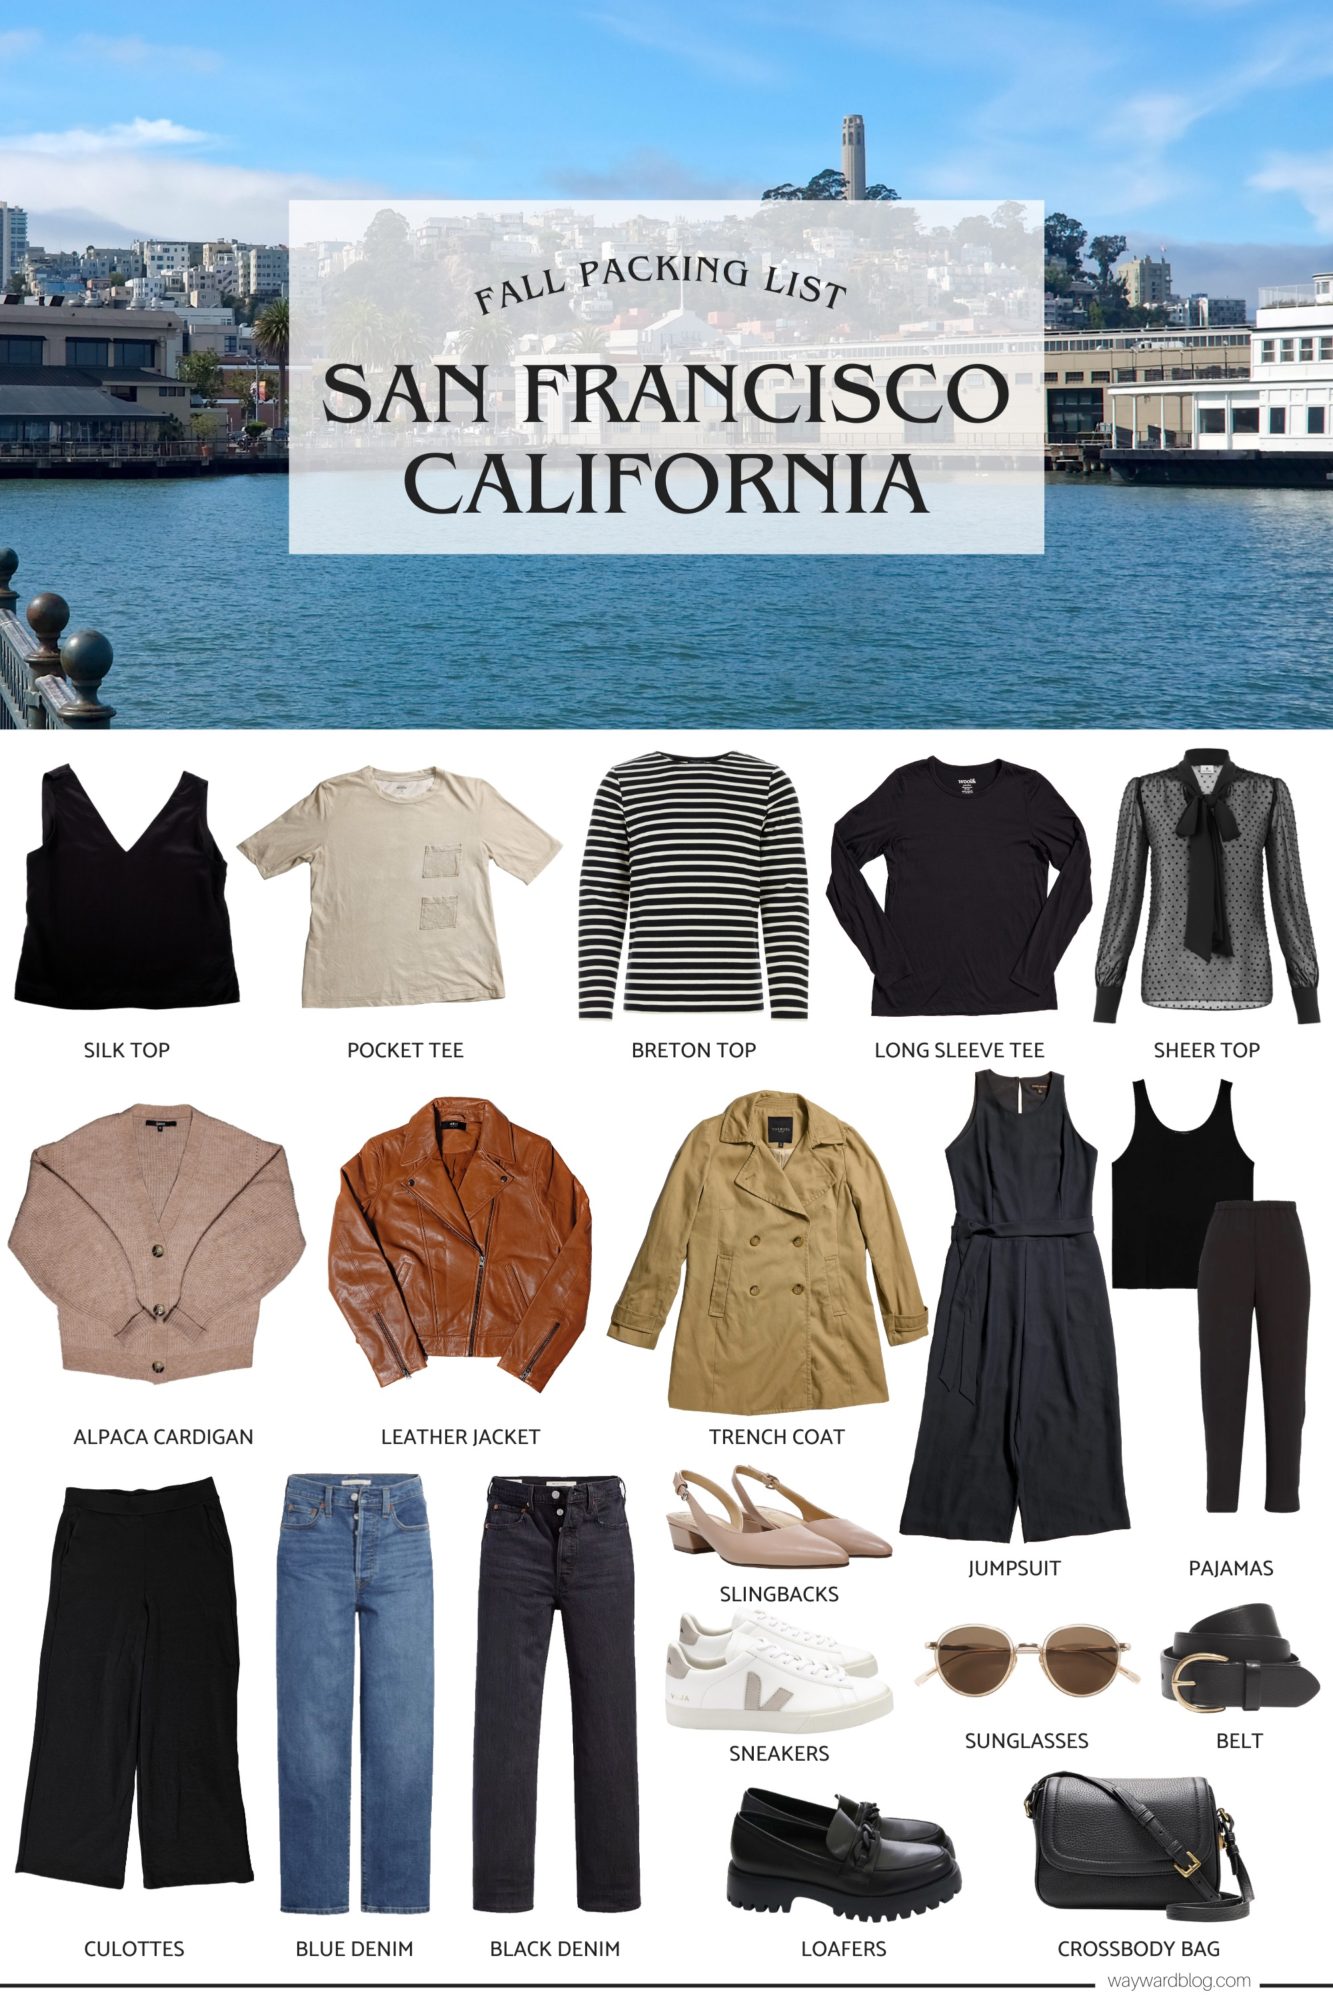 A collage of clothing, shoes, and accessories in the San Francisco Packing List